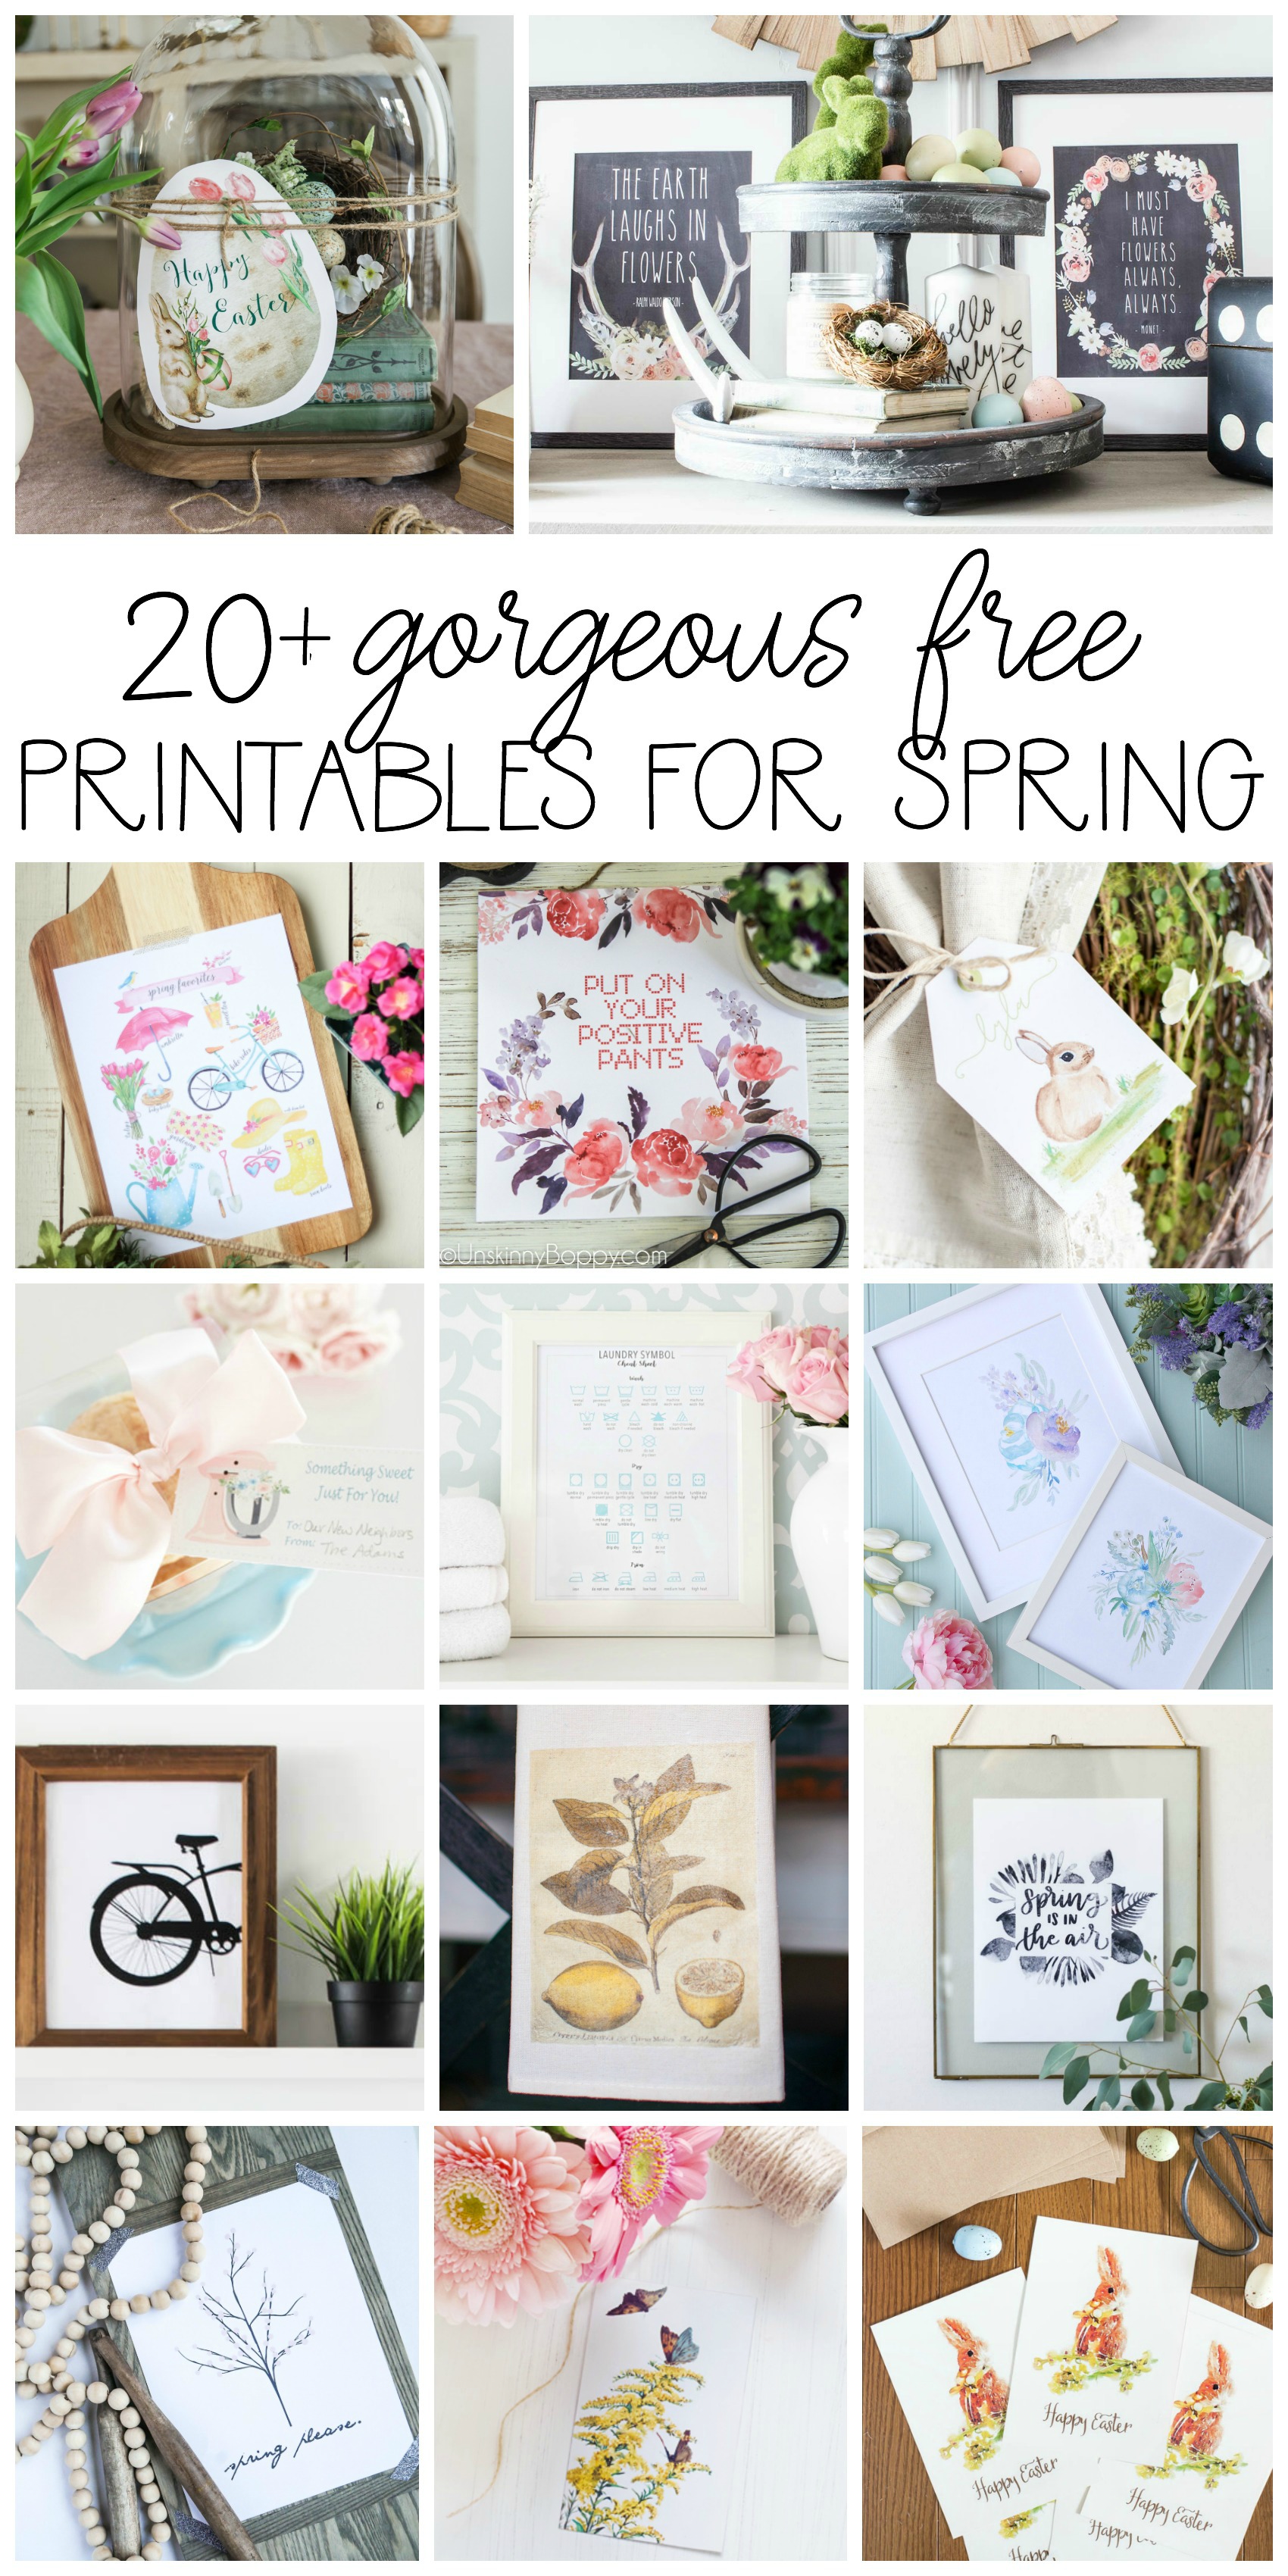 20 Gorgeous Free Printables For Spring poster.